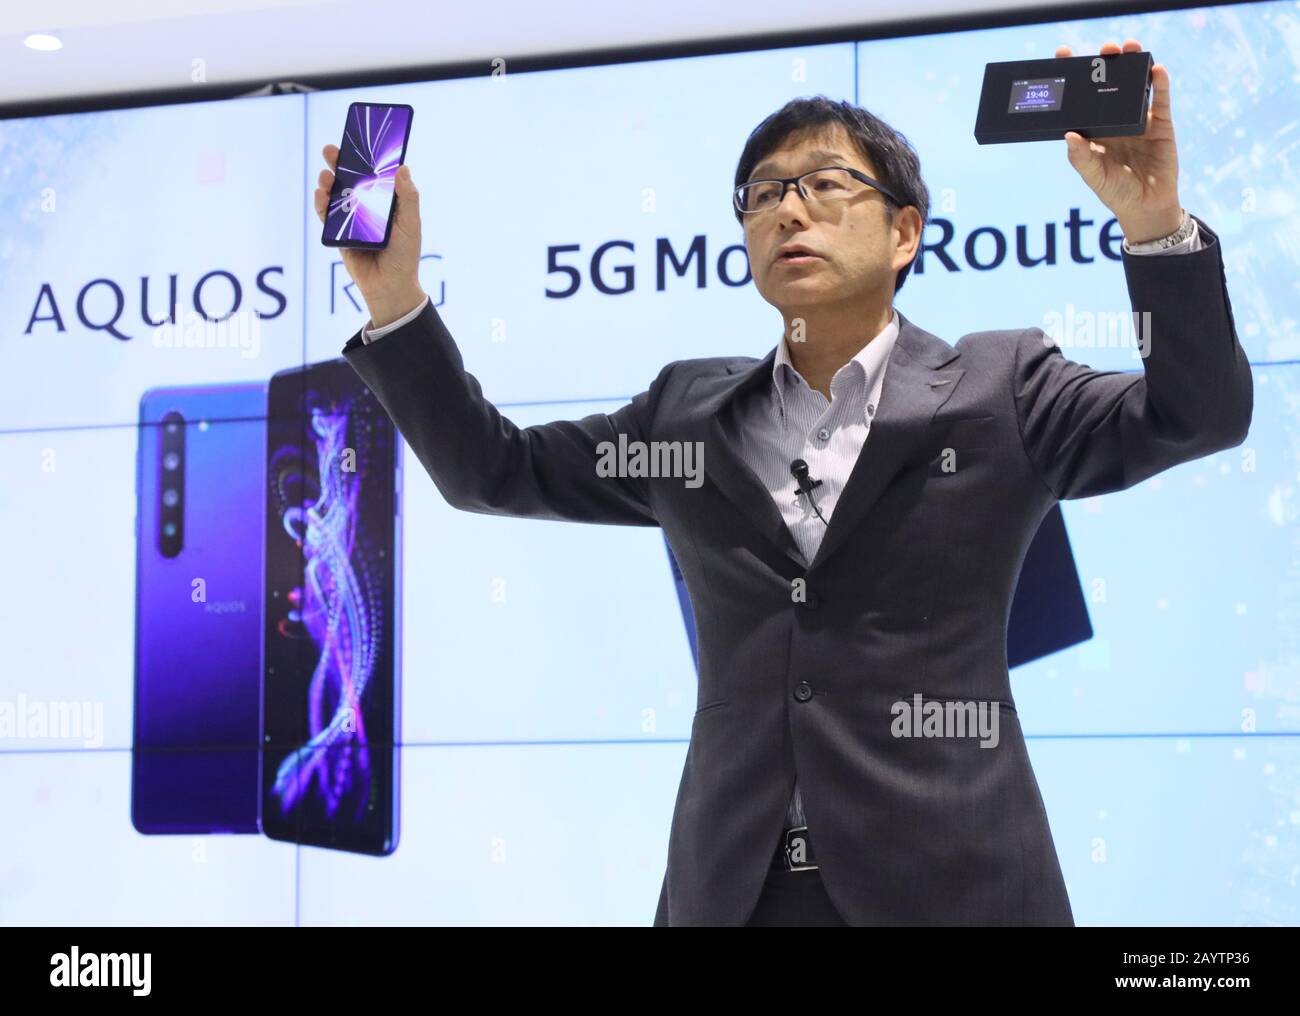 Tokyo, Japan. 17th Feb, 2020. Japan's electronics giant Sharp unveils the new 5G smartphone 'AQUOS R5G' equipped with Qualcomm's Snapdragon 865 on its CPU, 6.5-inch sized IGZO LCD display and three cameras with a 3D sensor and the new 5G mobile router at the company's Tokyo office in Tokyo on Monday, February 17, 2020. Sharp will put Japan's first 5G smartphone on the market in this spring. Credit: Yoshio Tsunoda/AFLO/Alamy Live News Stock Photo